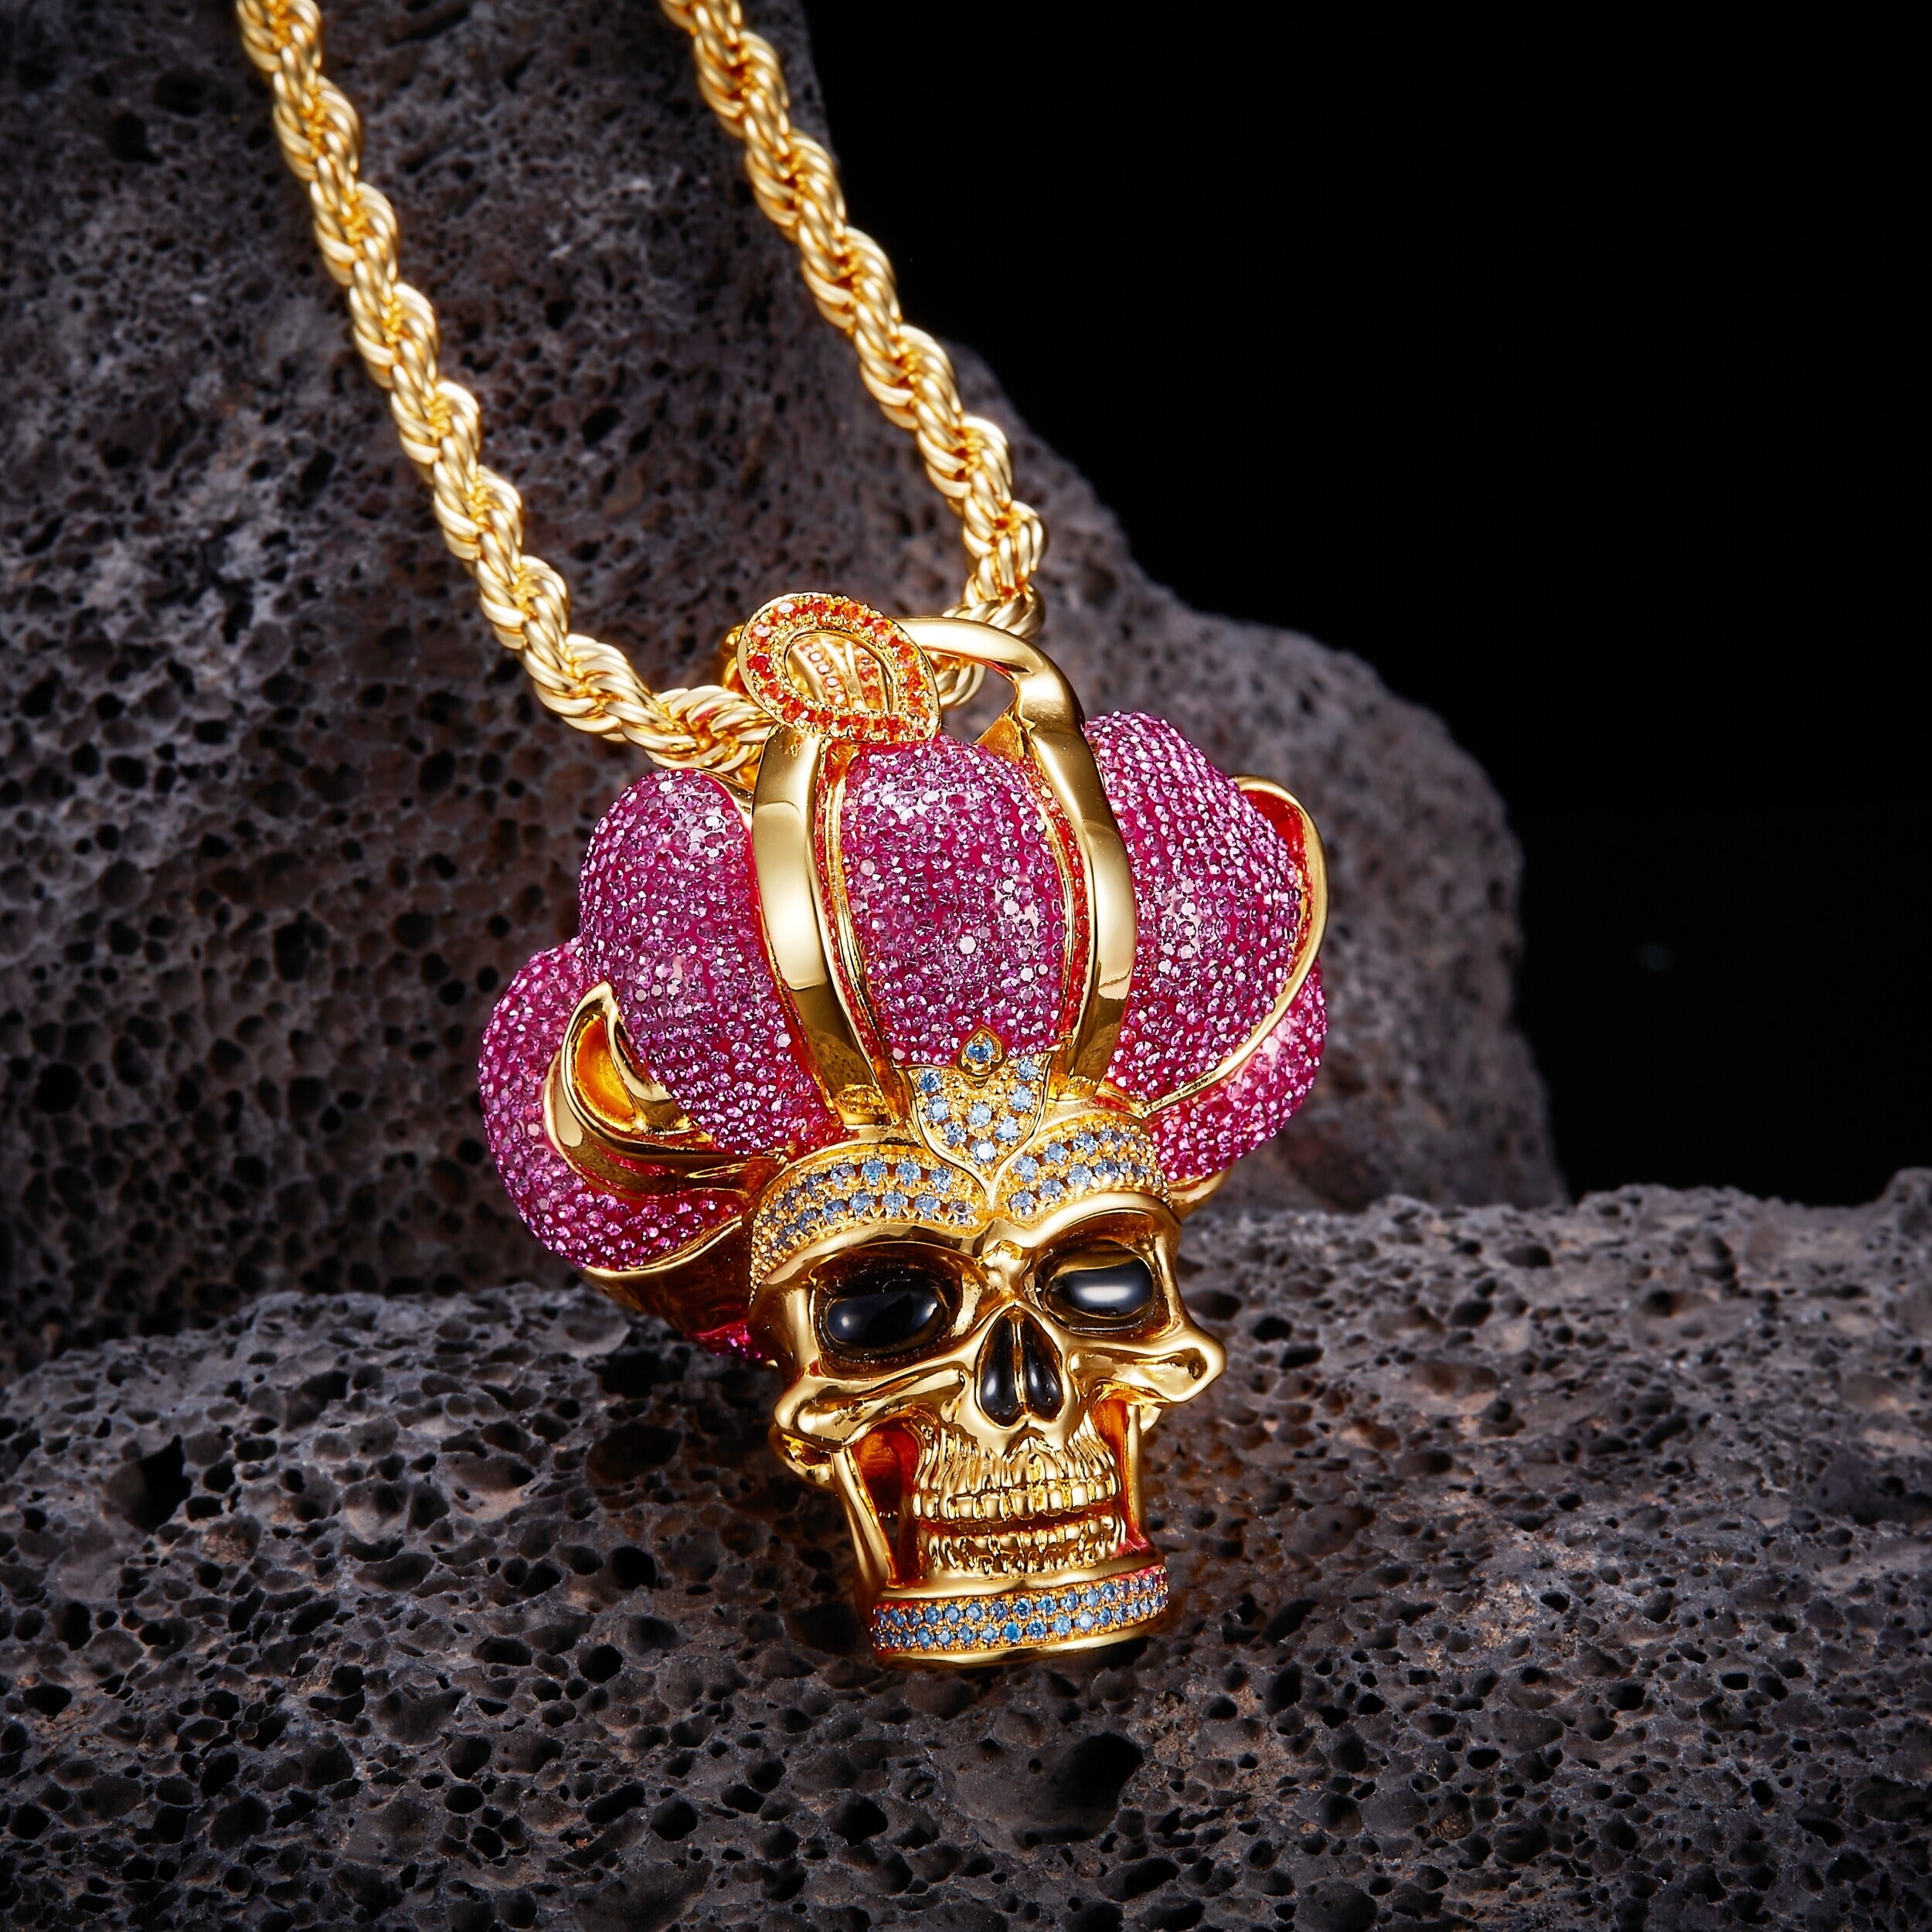 What does wearing a skull necklace mean?